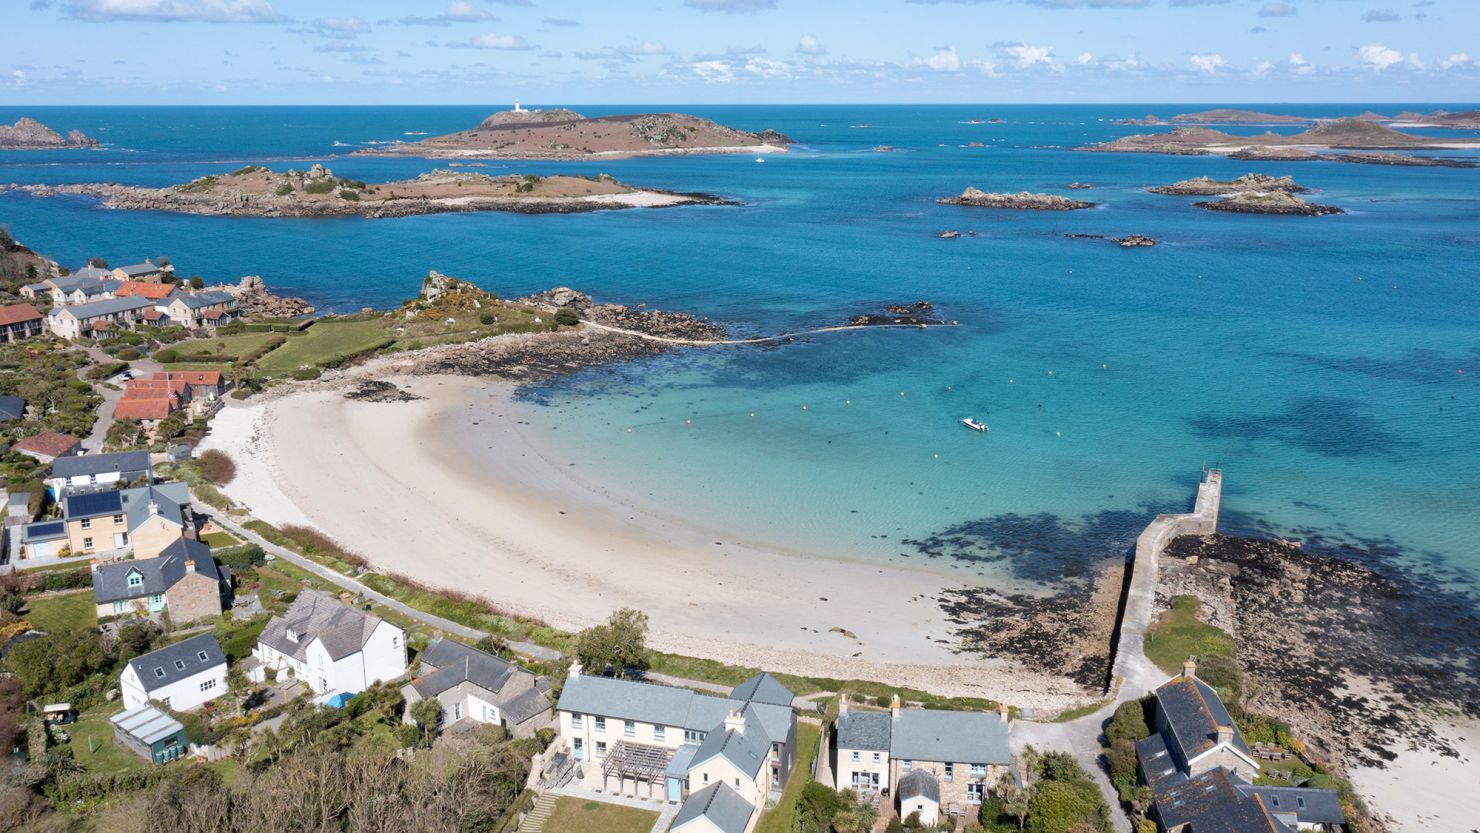 The Isles of Scilly were voted the most scenic destination of outstanding natural beauty in the UK. 